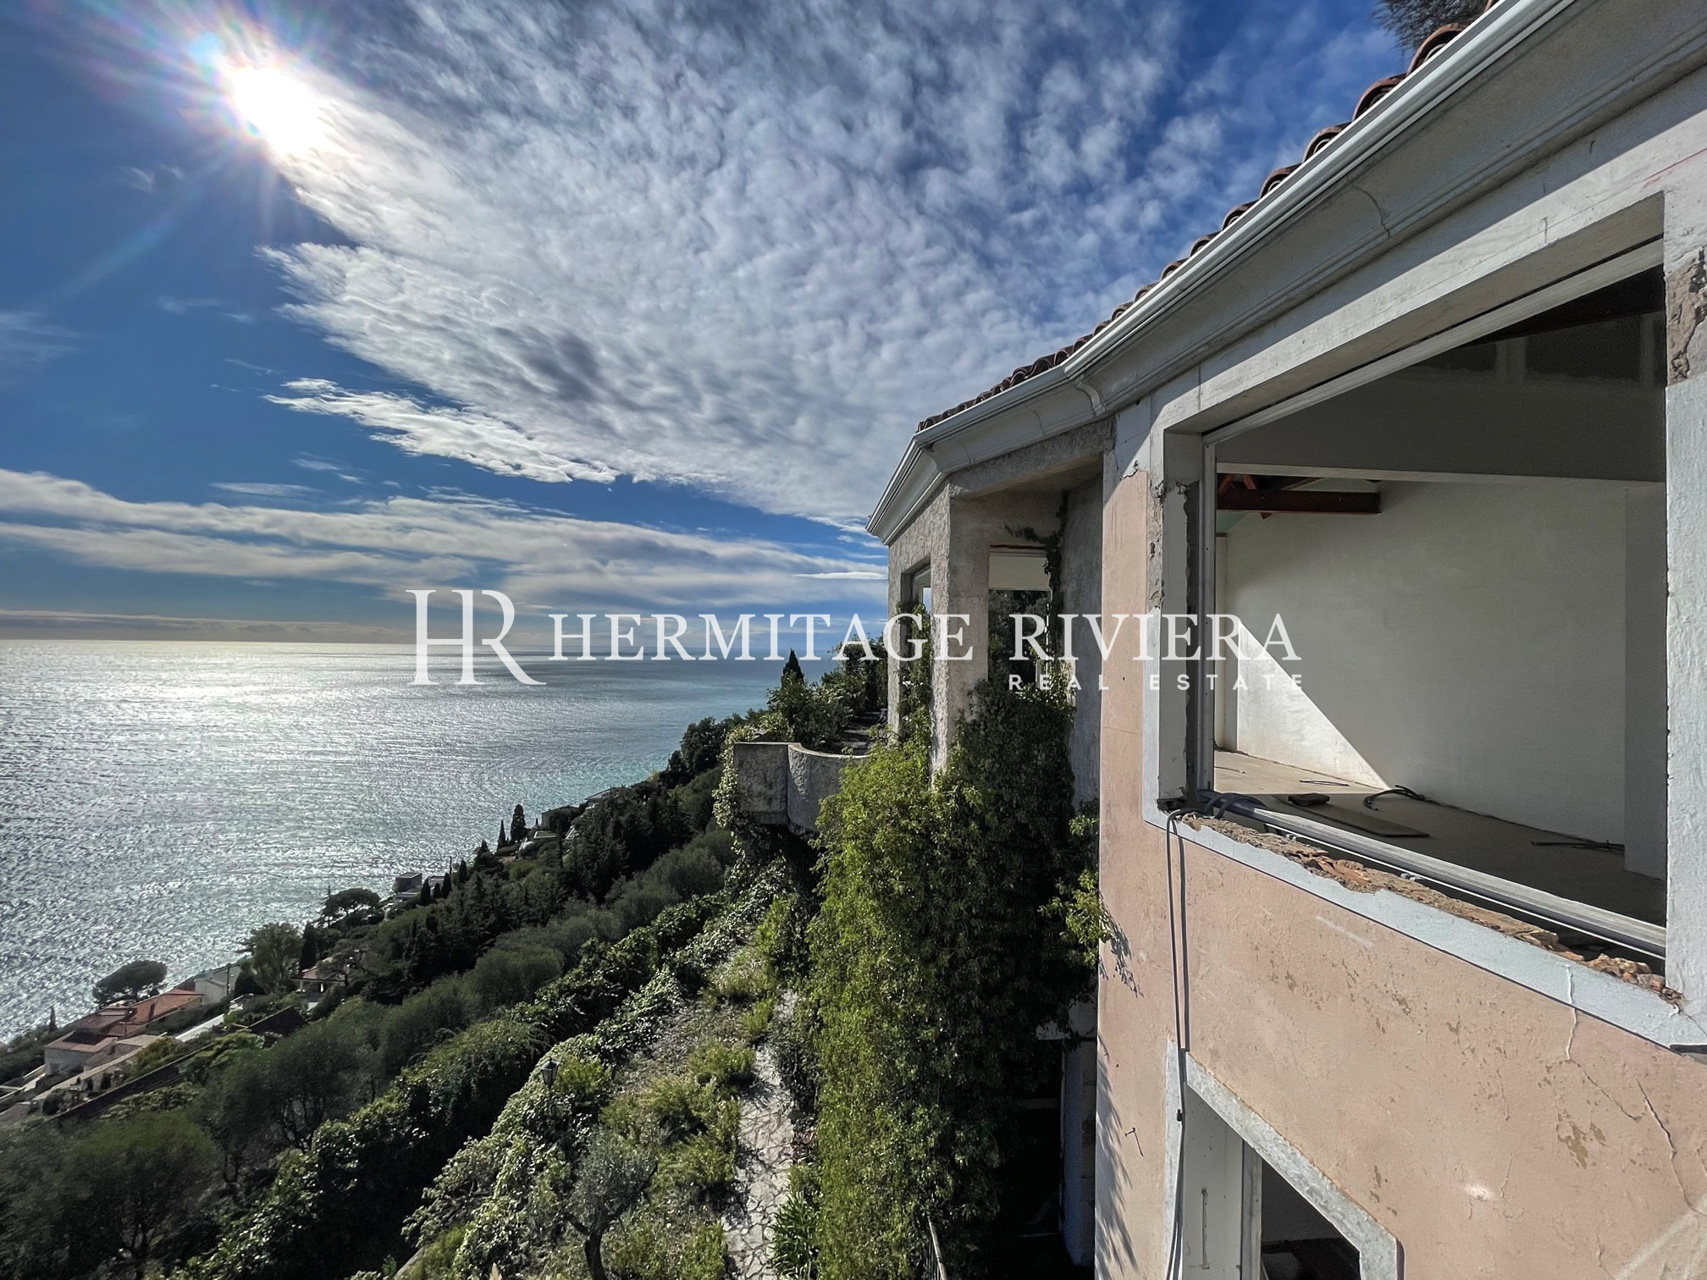 Property close Monaco with panoramic view  (image 7)